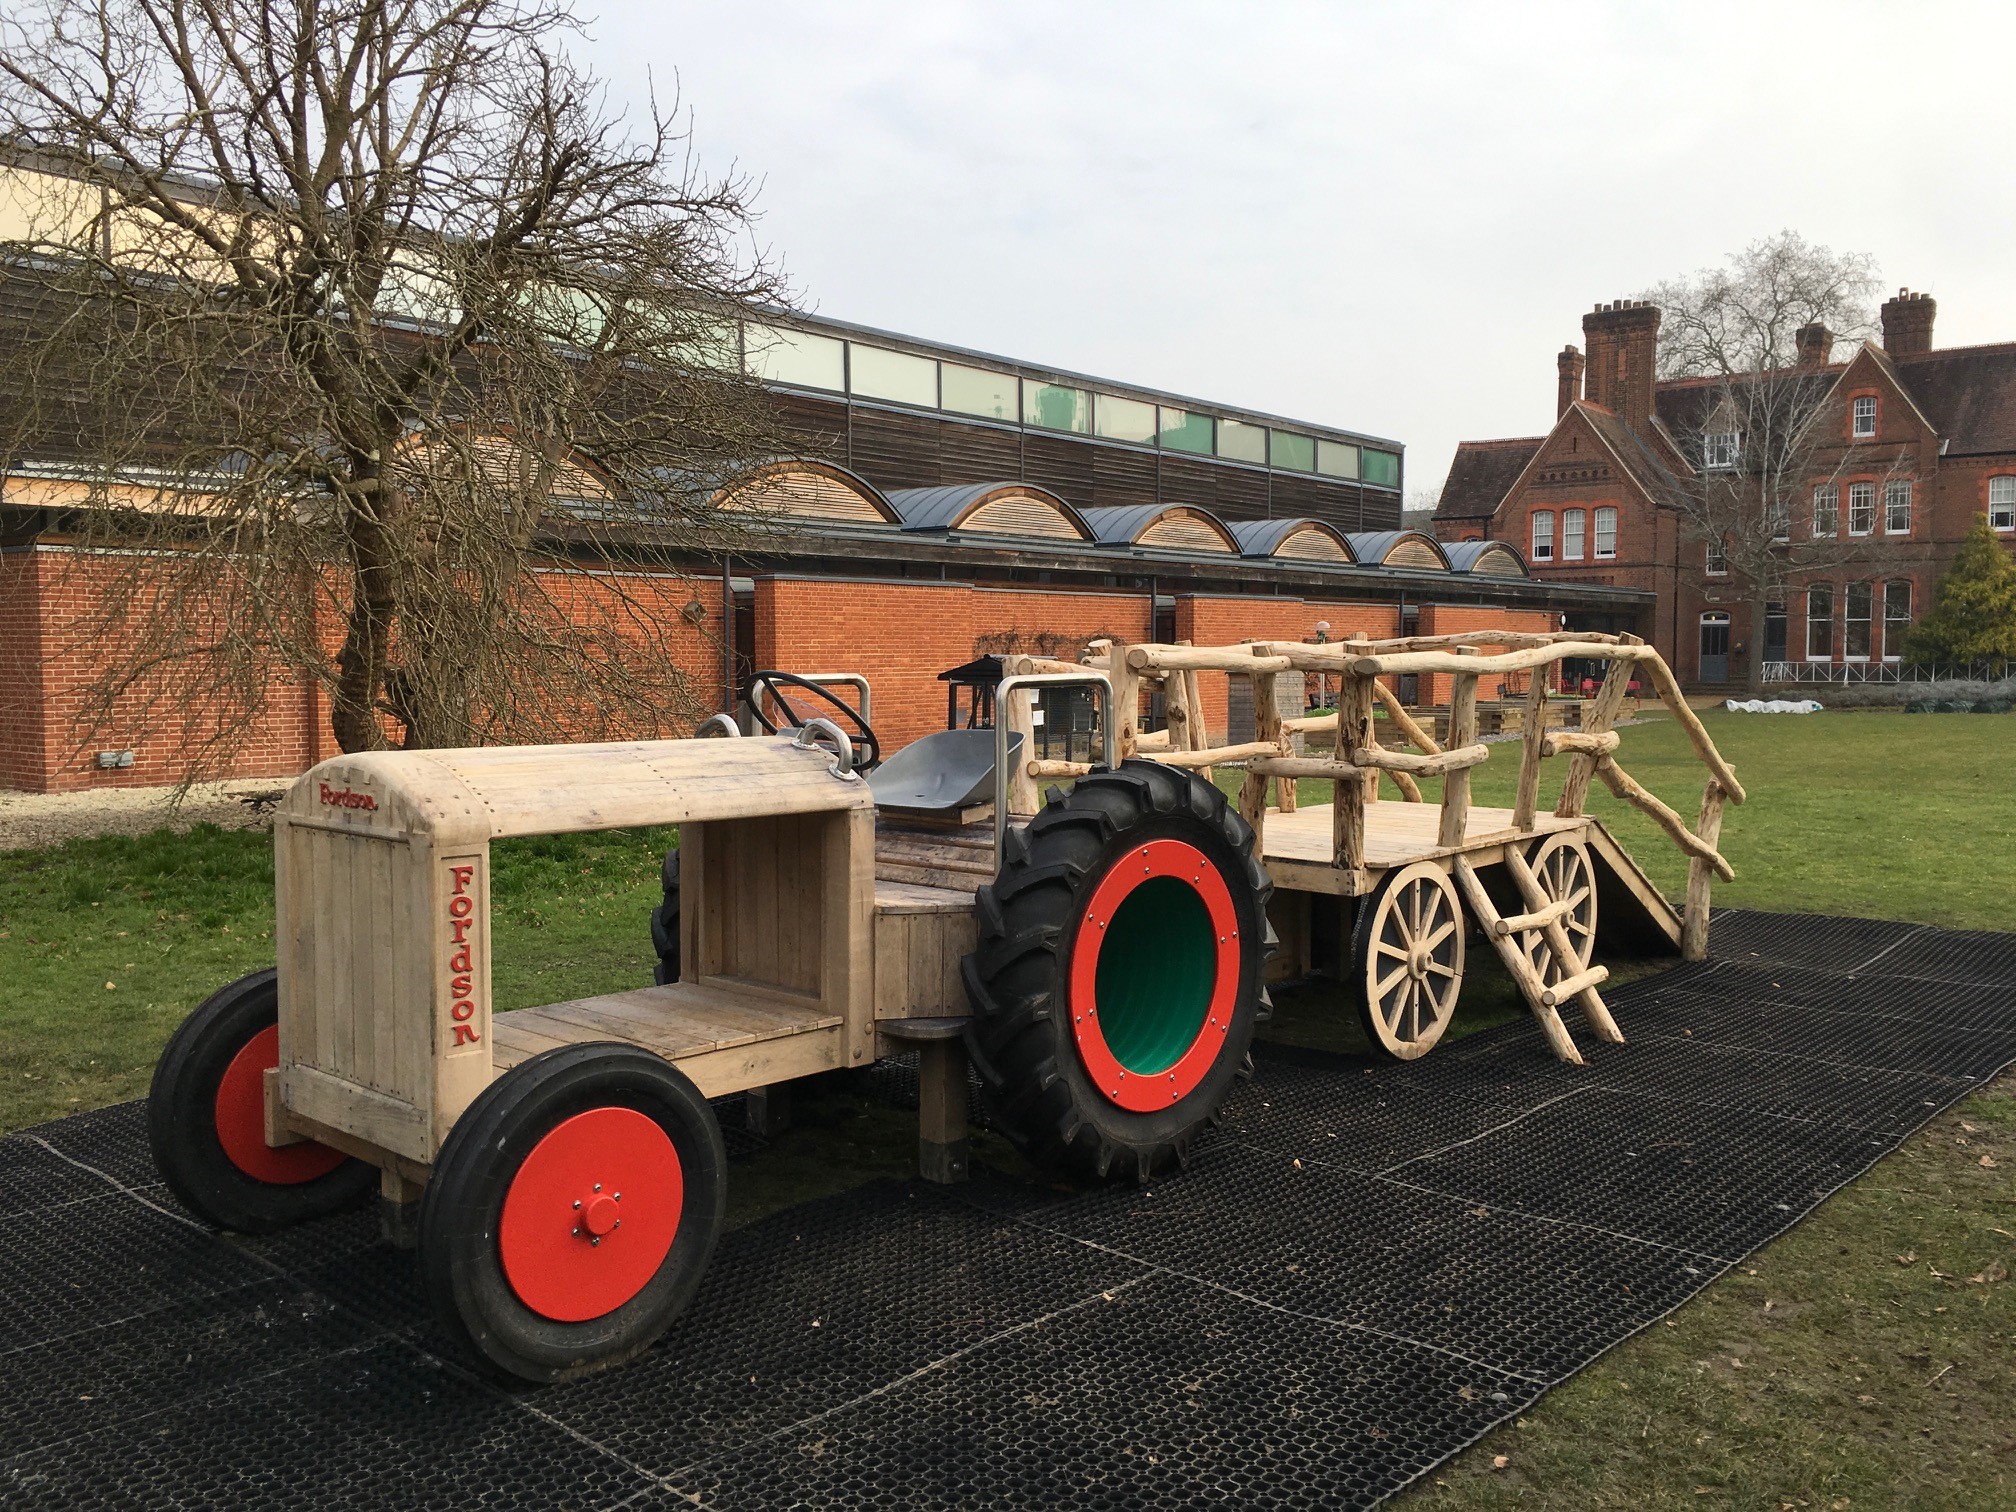 The play tractor and wagon in the MERL garden